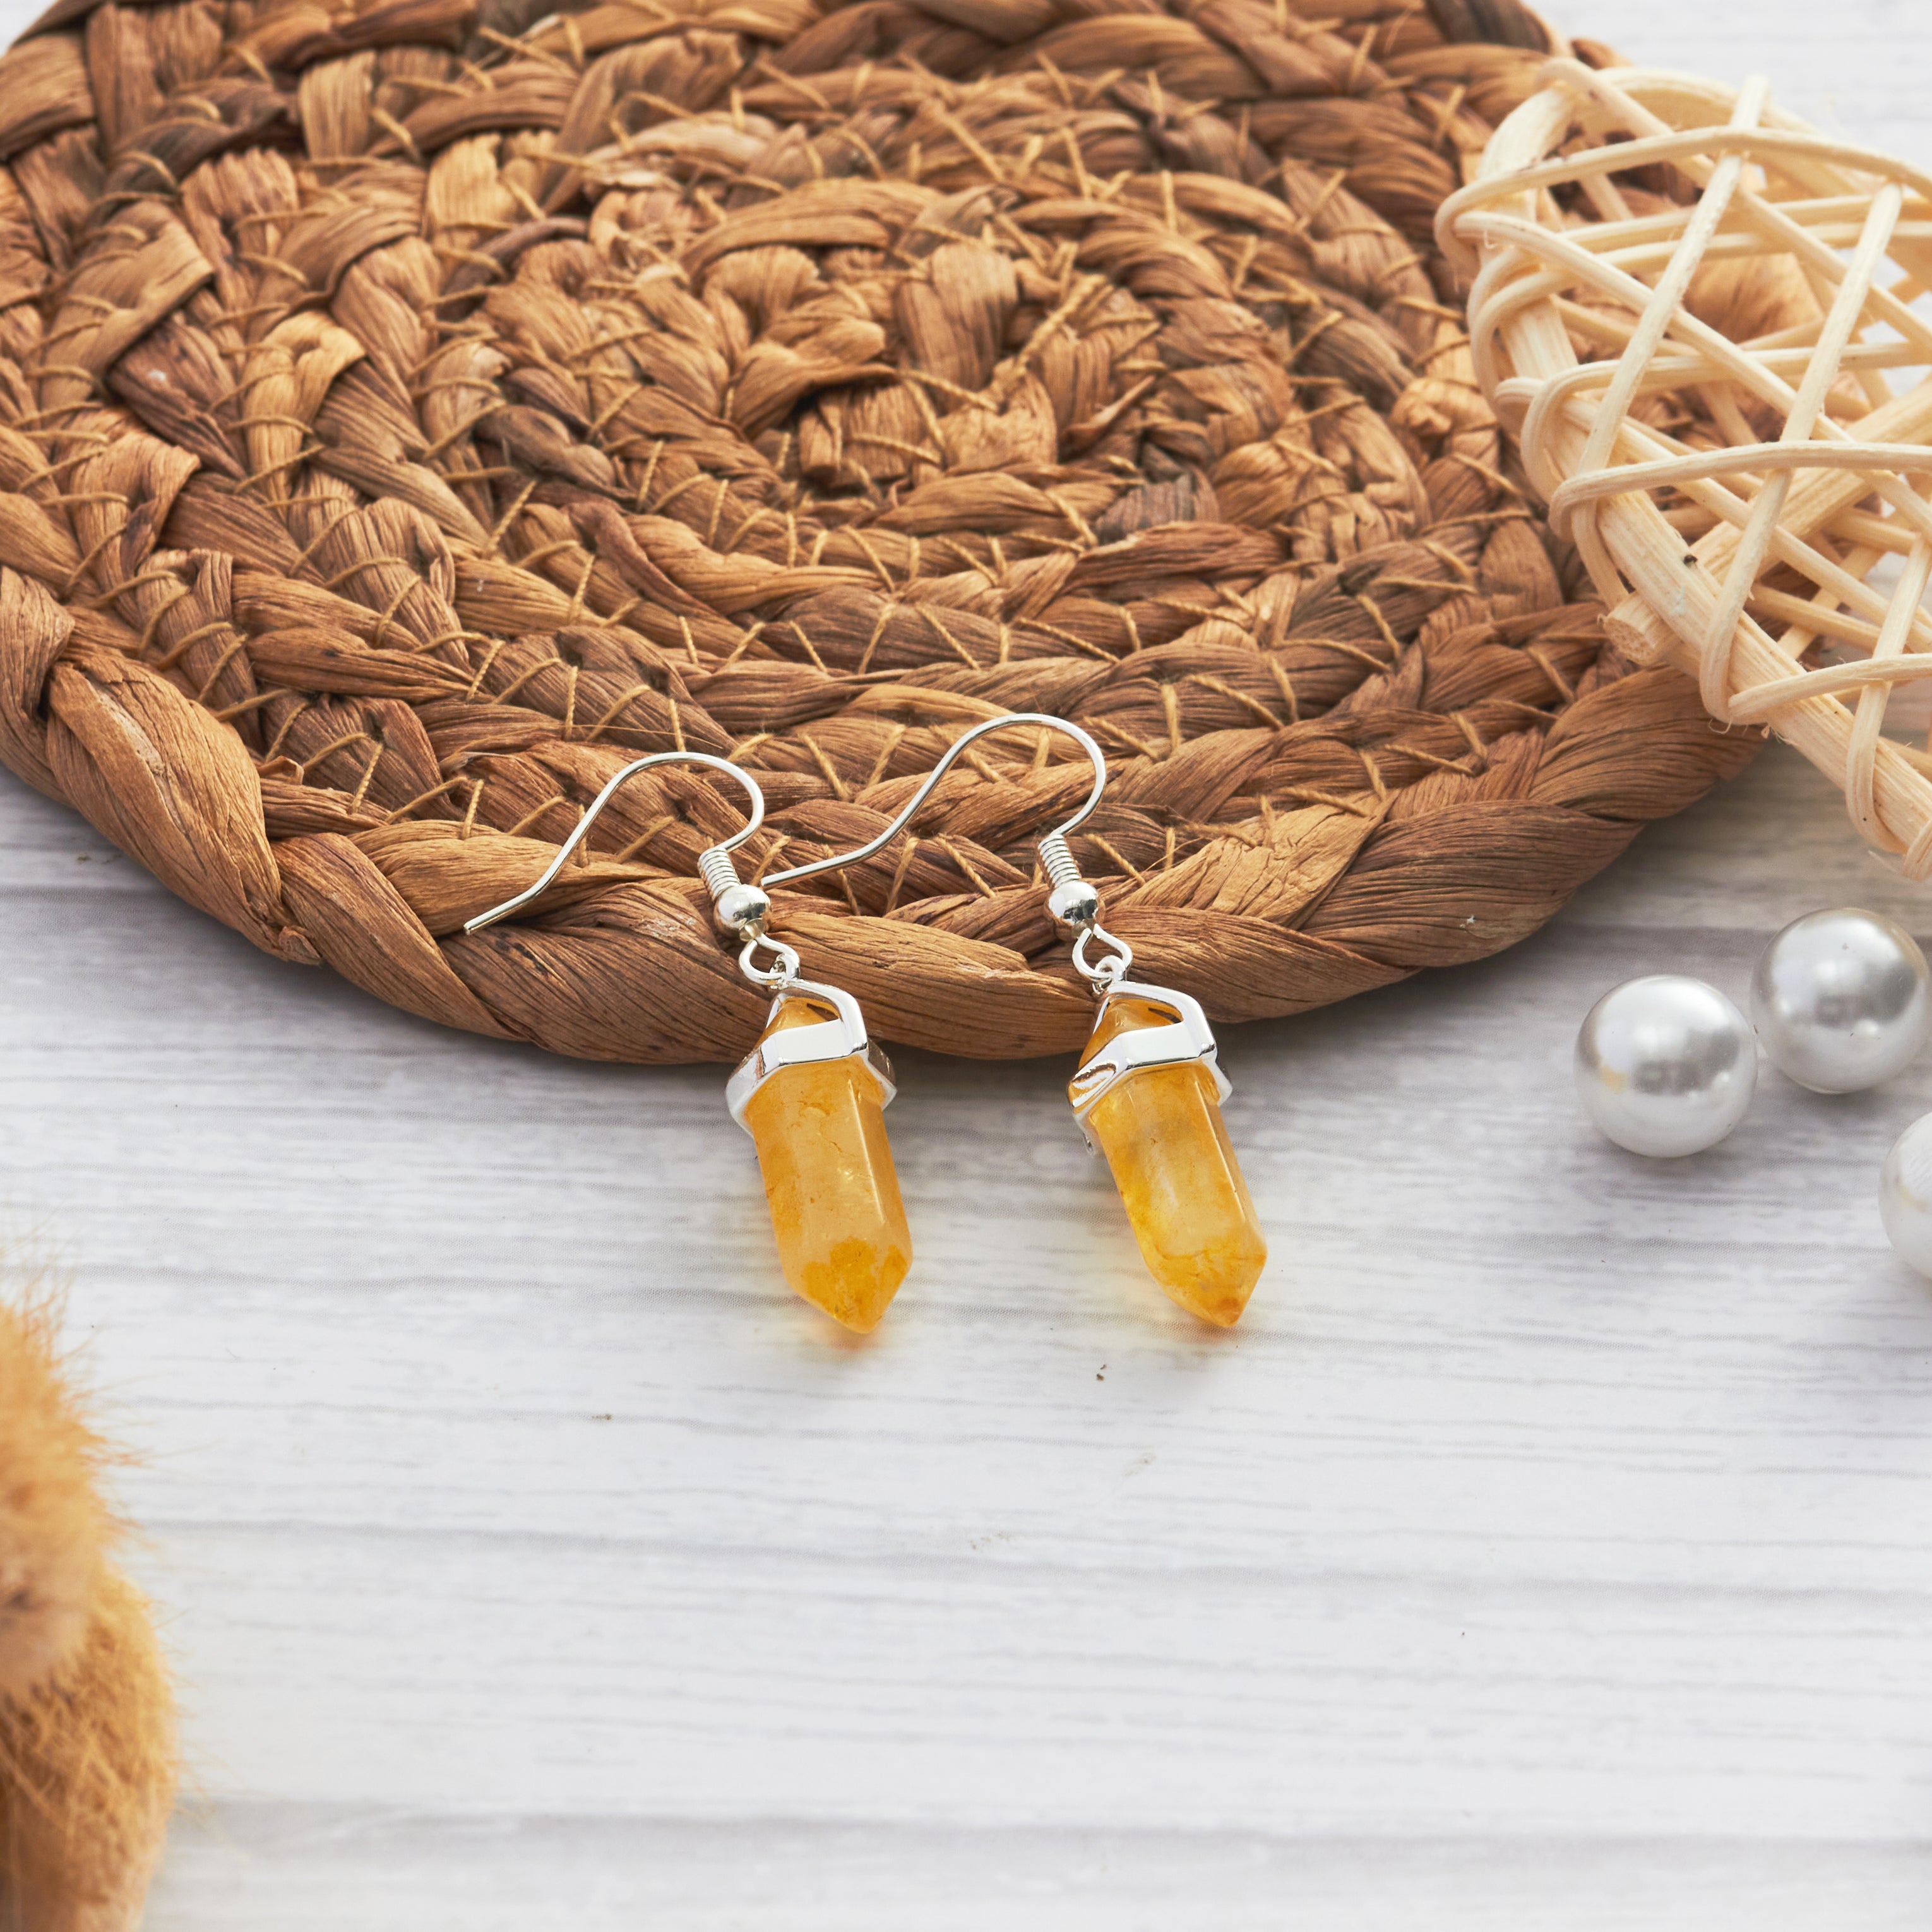 Yellow Quartz Gemstone Drop Earrings with Quote Card